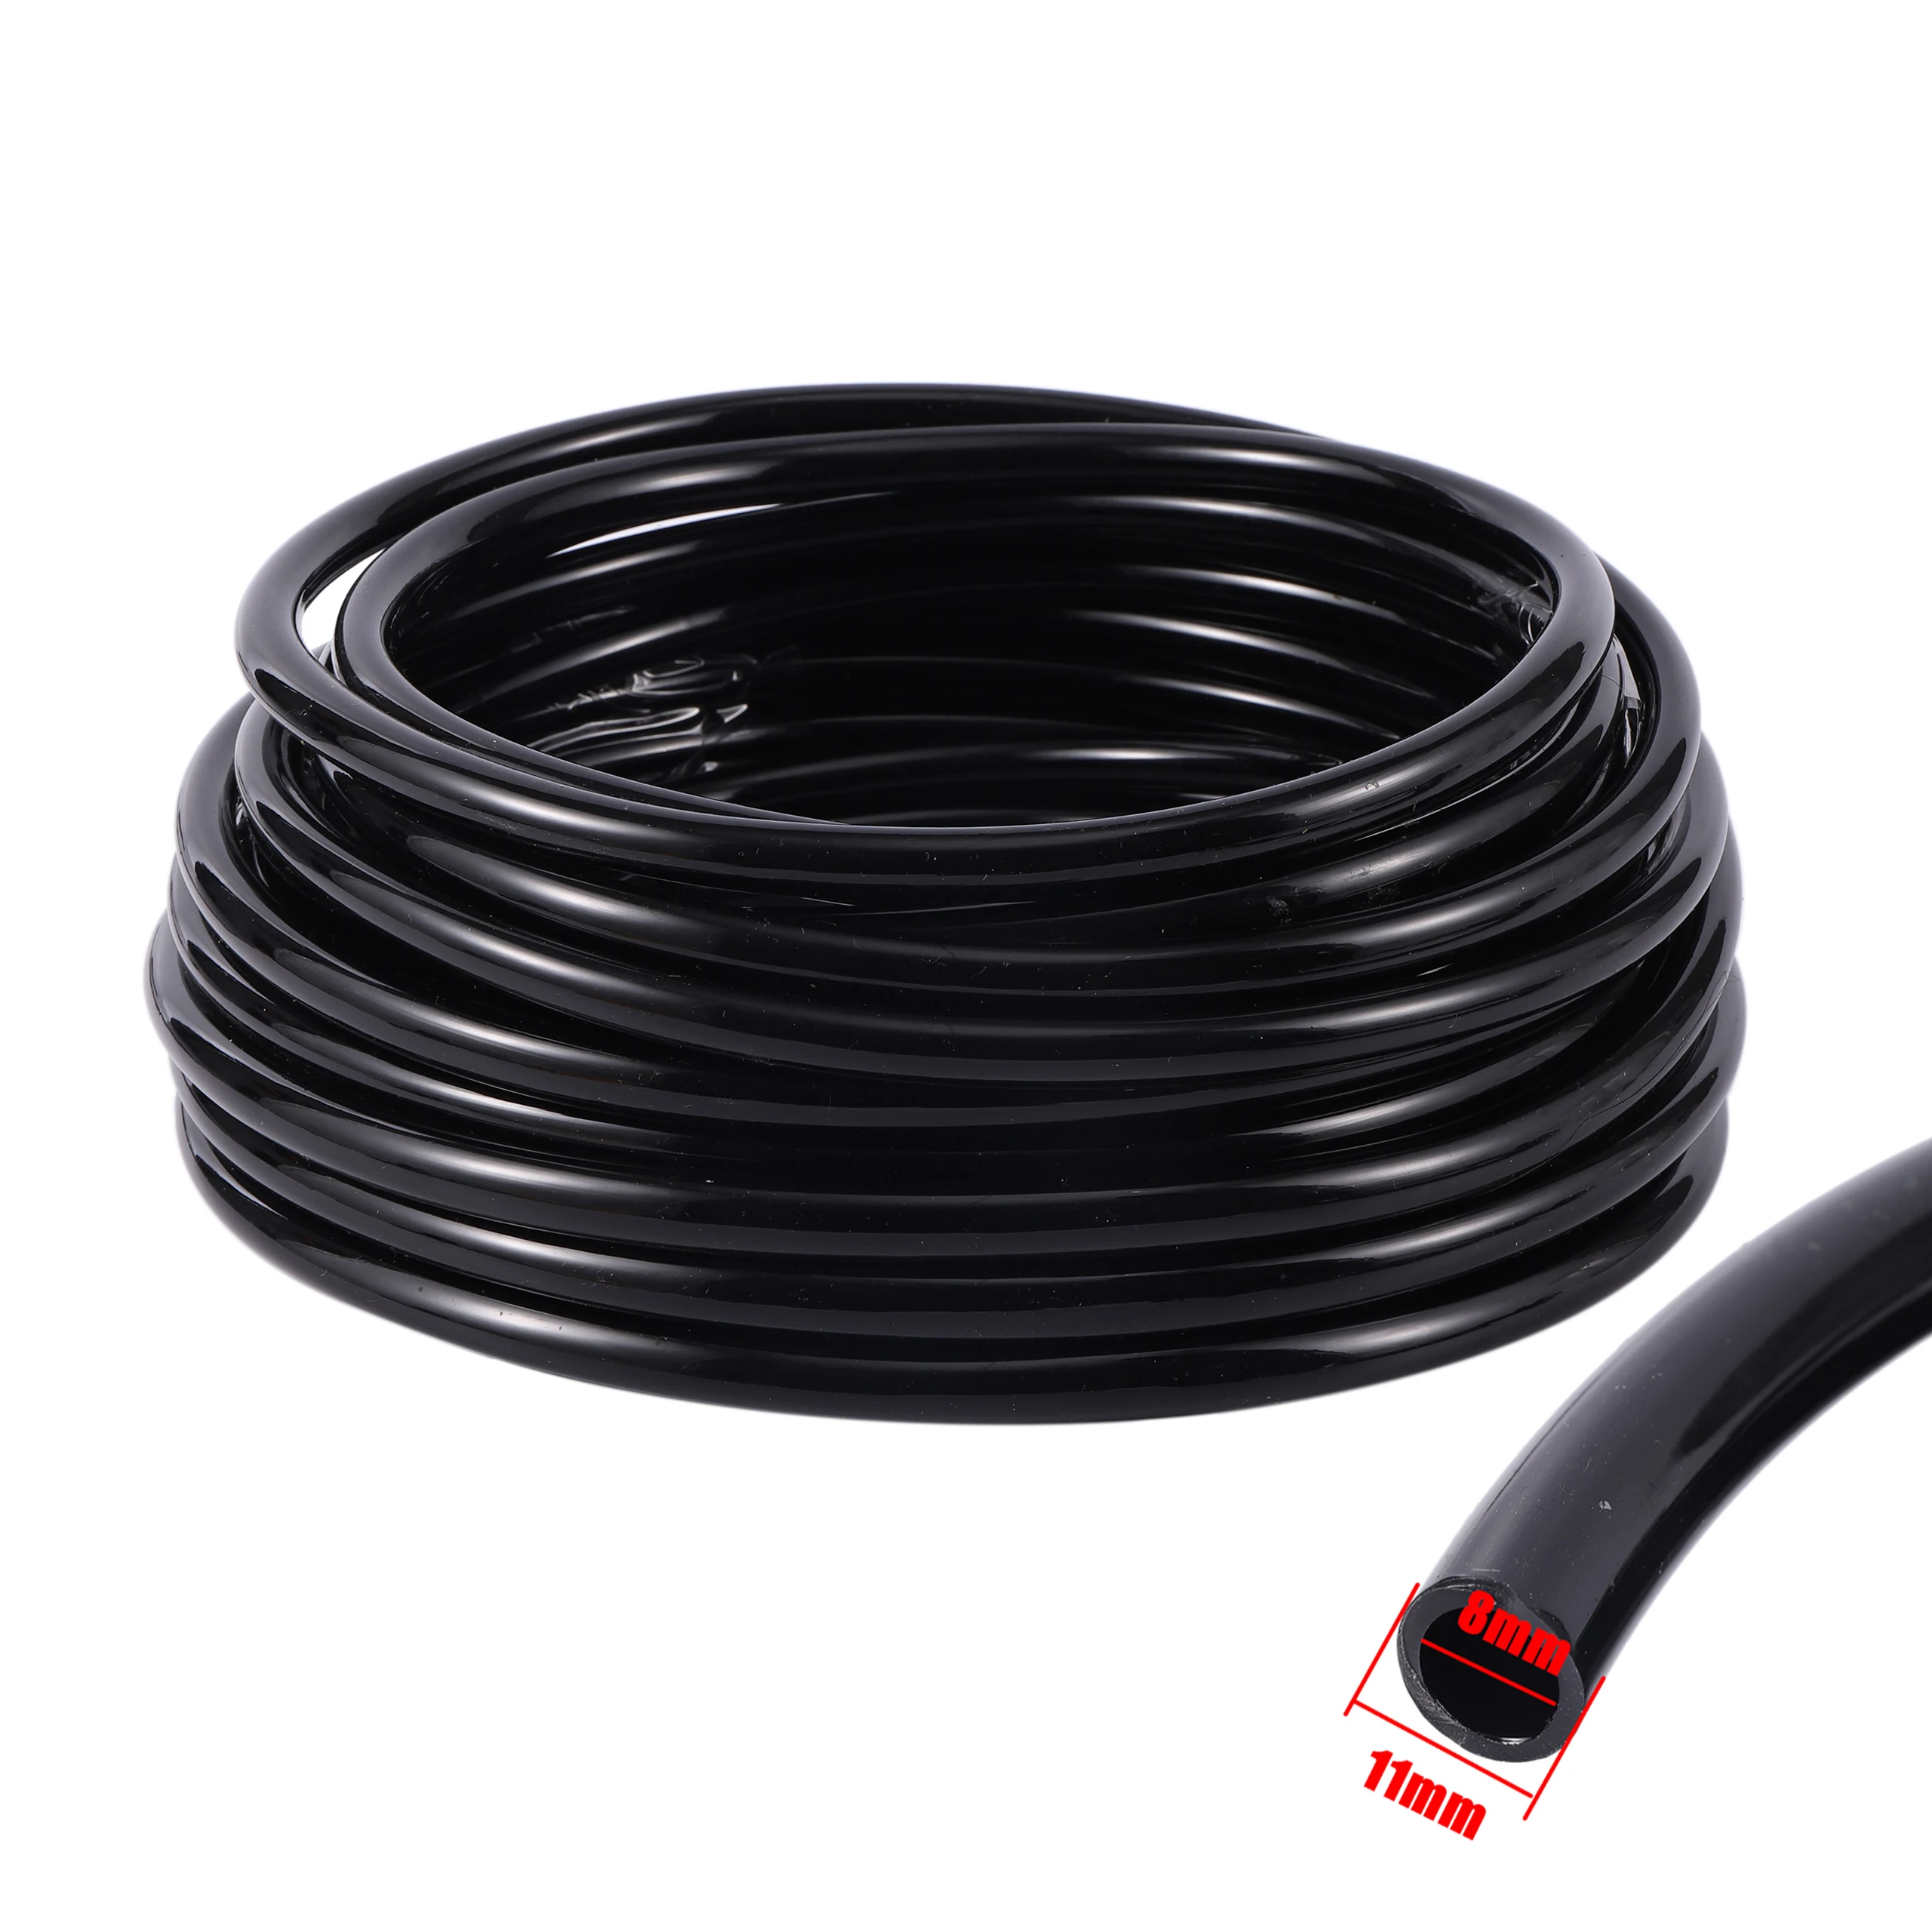 

10m 20m 30m 8/11mm Hose 3/8 Inch Drip Pipe Garden Agriculture Greenhouse Irrigation Watering Tubing Water Hose Reels